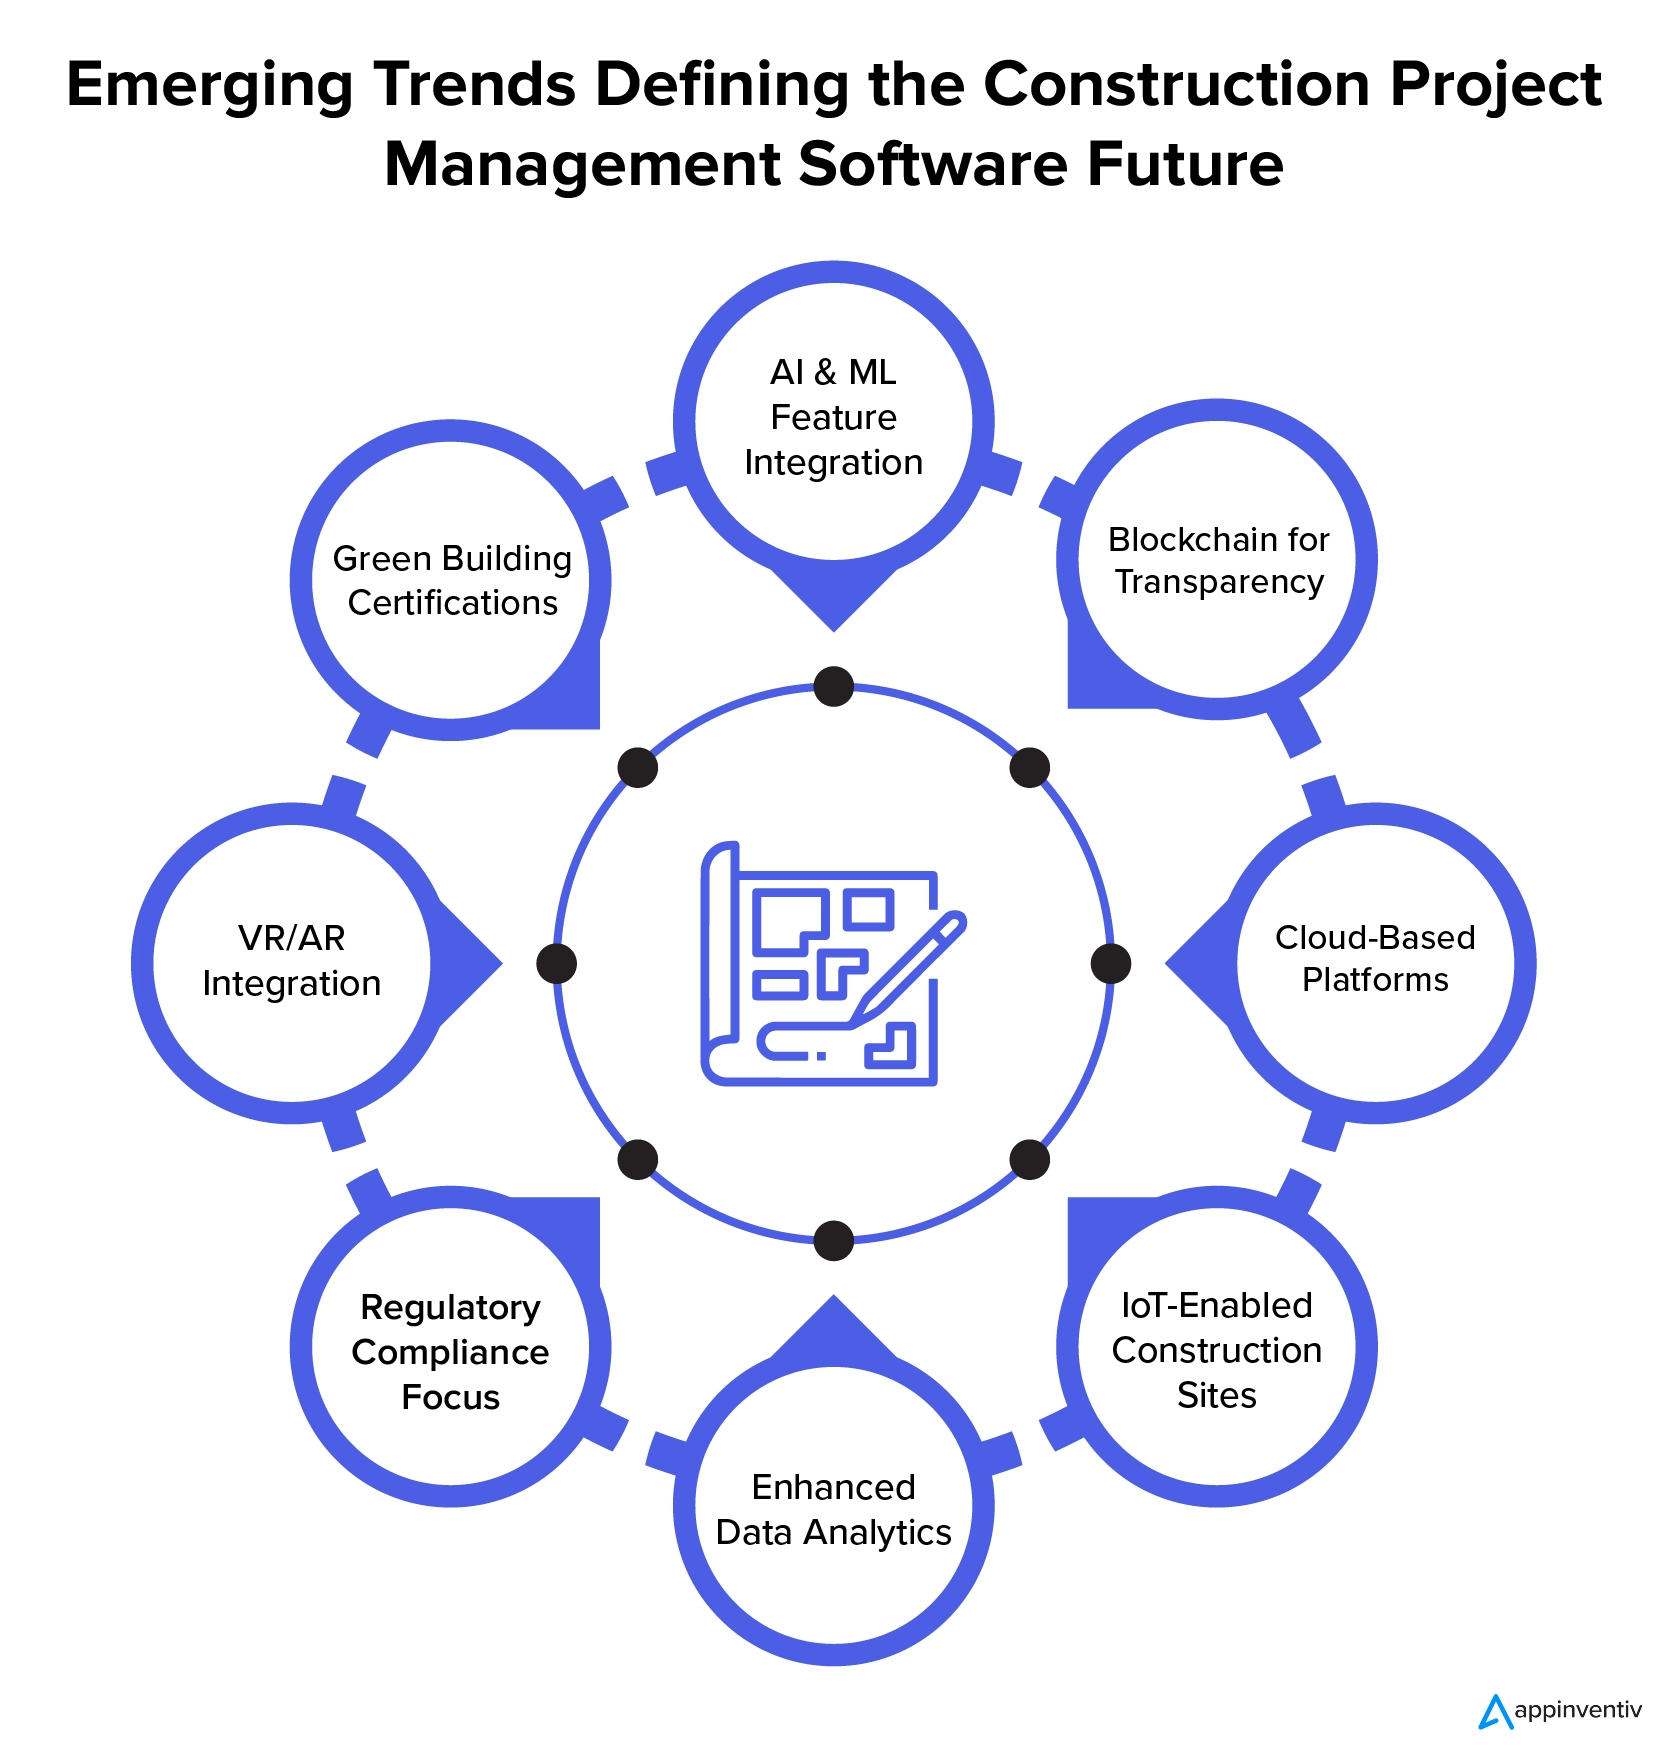 Key trends that will determine the future of construction project management software